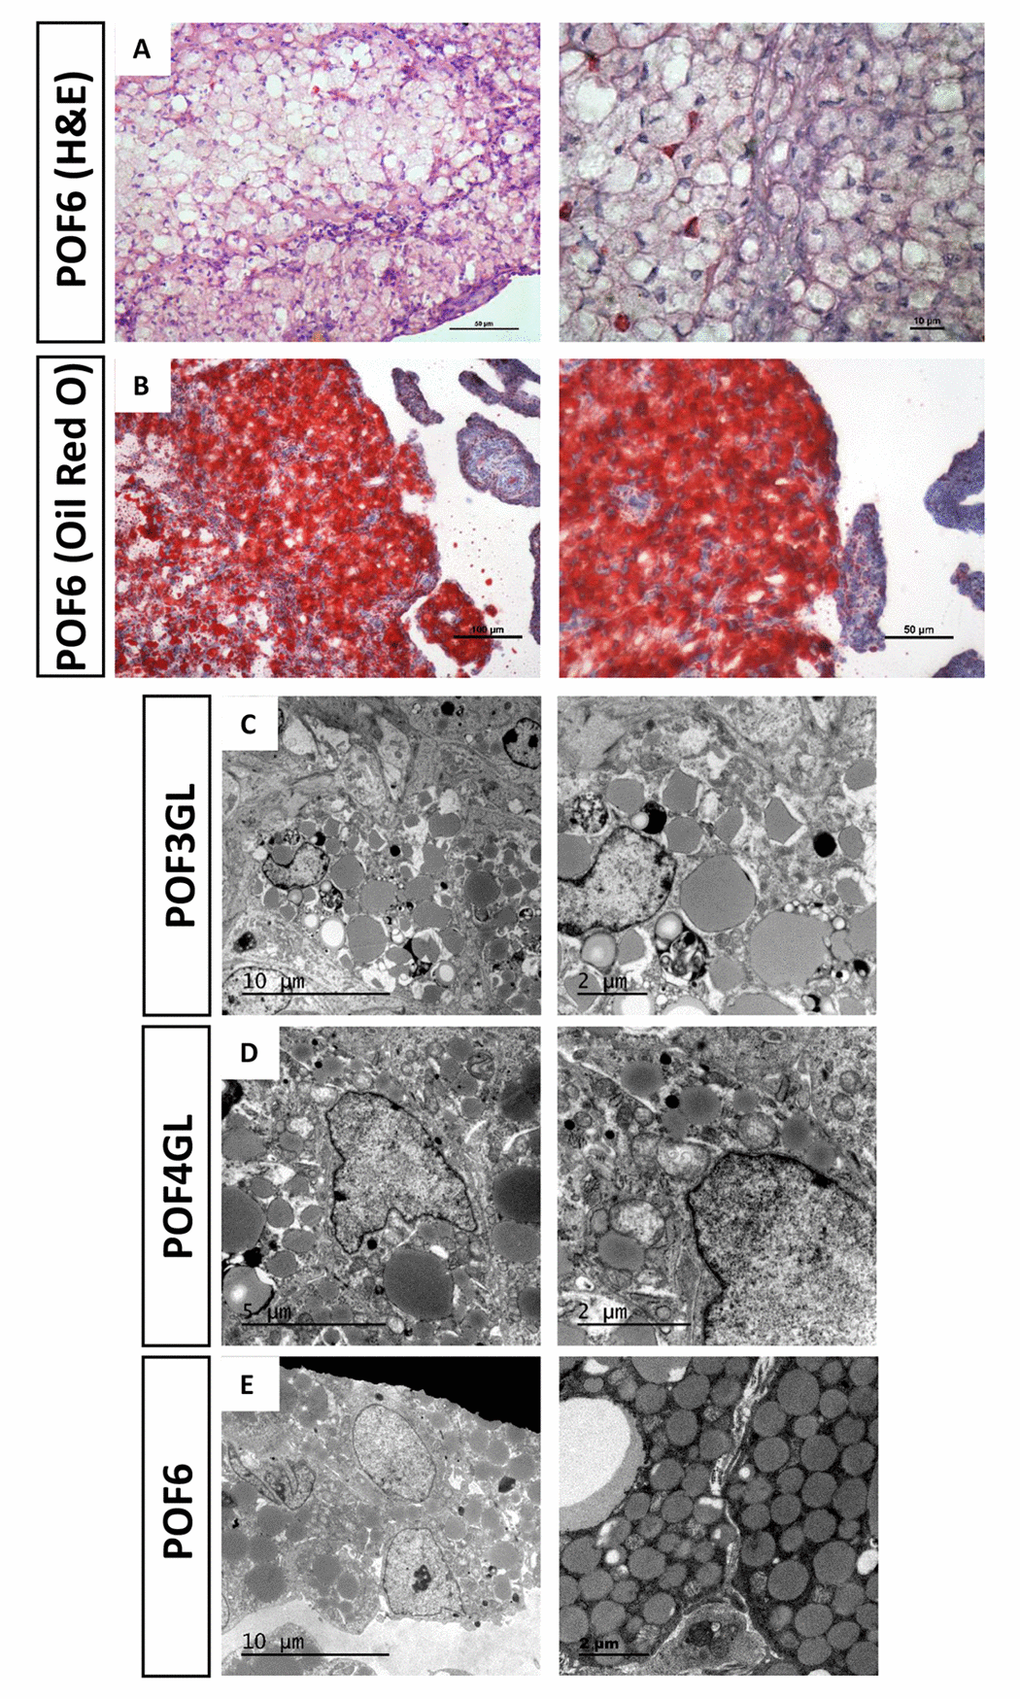 Steatosis-like morphology occurring in the granulosa cells from POFs. (A) HE staining was used to observe steatosis-like granulosa cells in POF6. Scale bars: 50 µm and 10 μm. (B) Oil Red O staining was used to verify lipid droplets existing in the coalescence of POF6. Scale bars: 100 µm and 50 µm. (C-E) TEM was used to observe the large quantity of lipid droplets existing in POF3, POF4 and POF6.